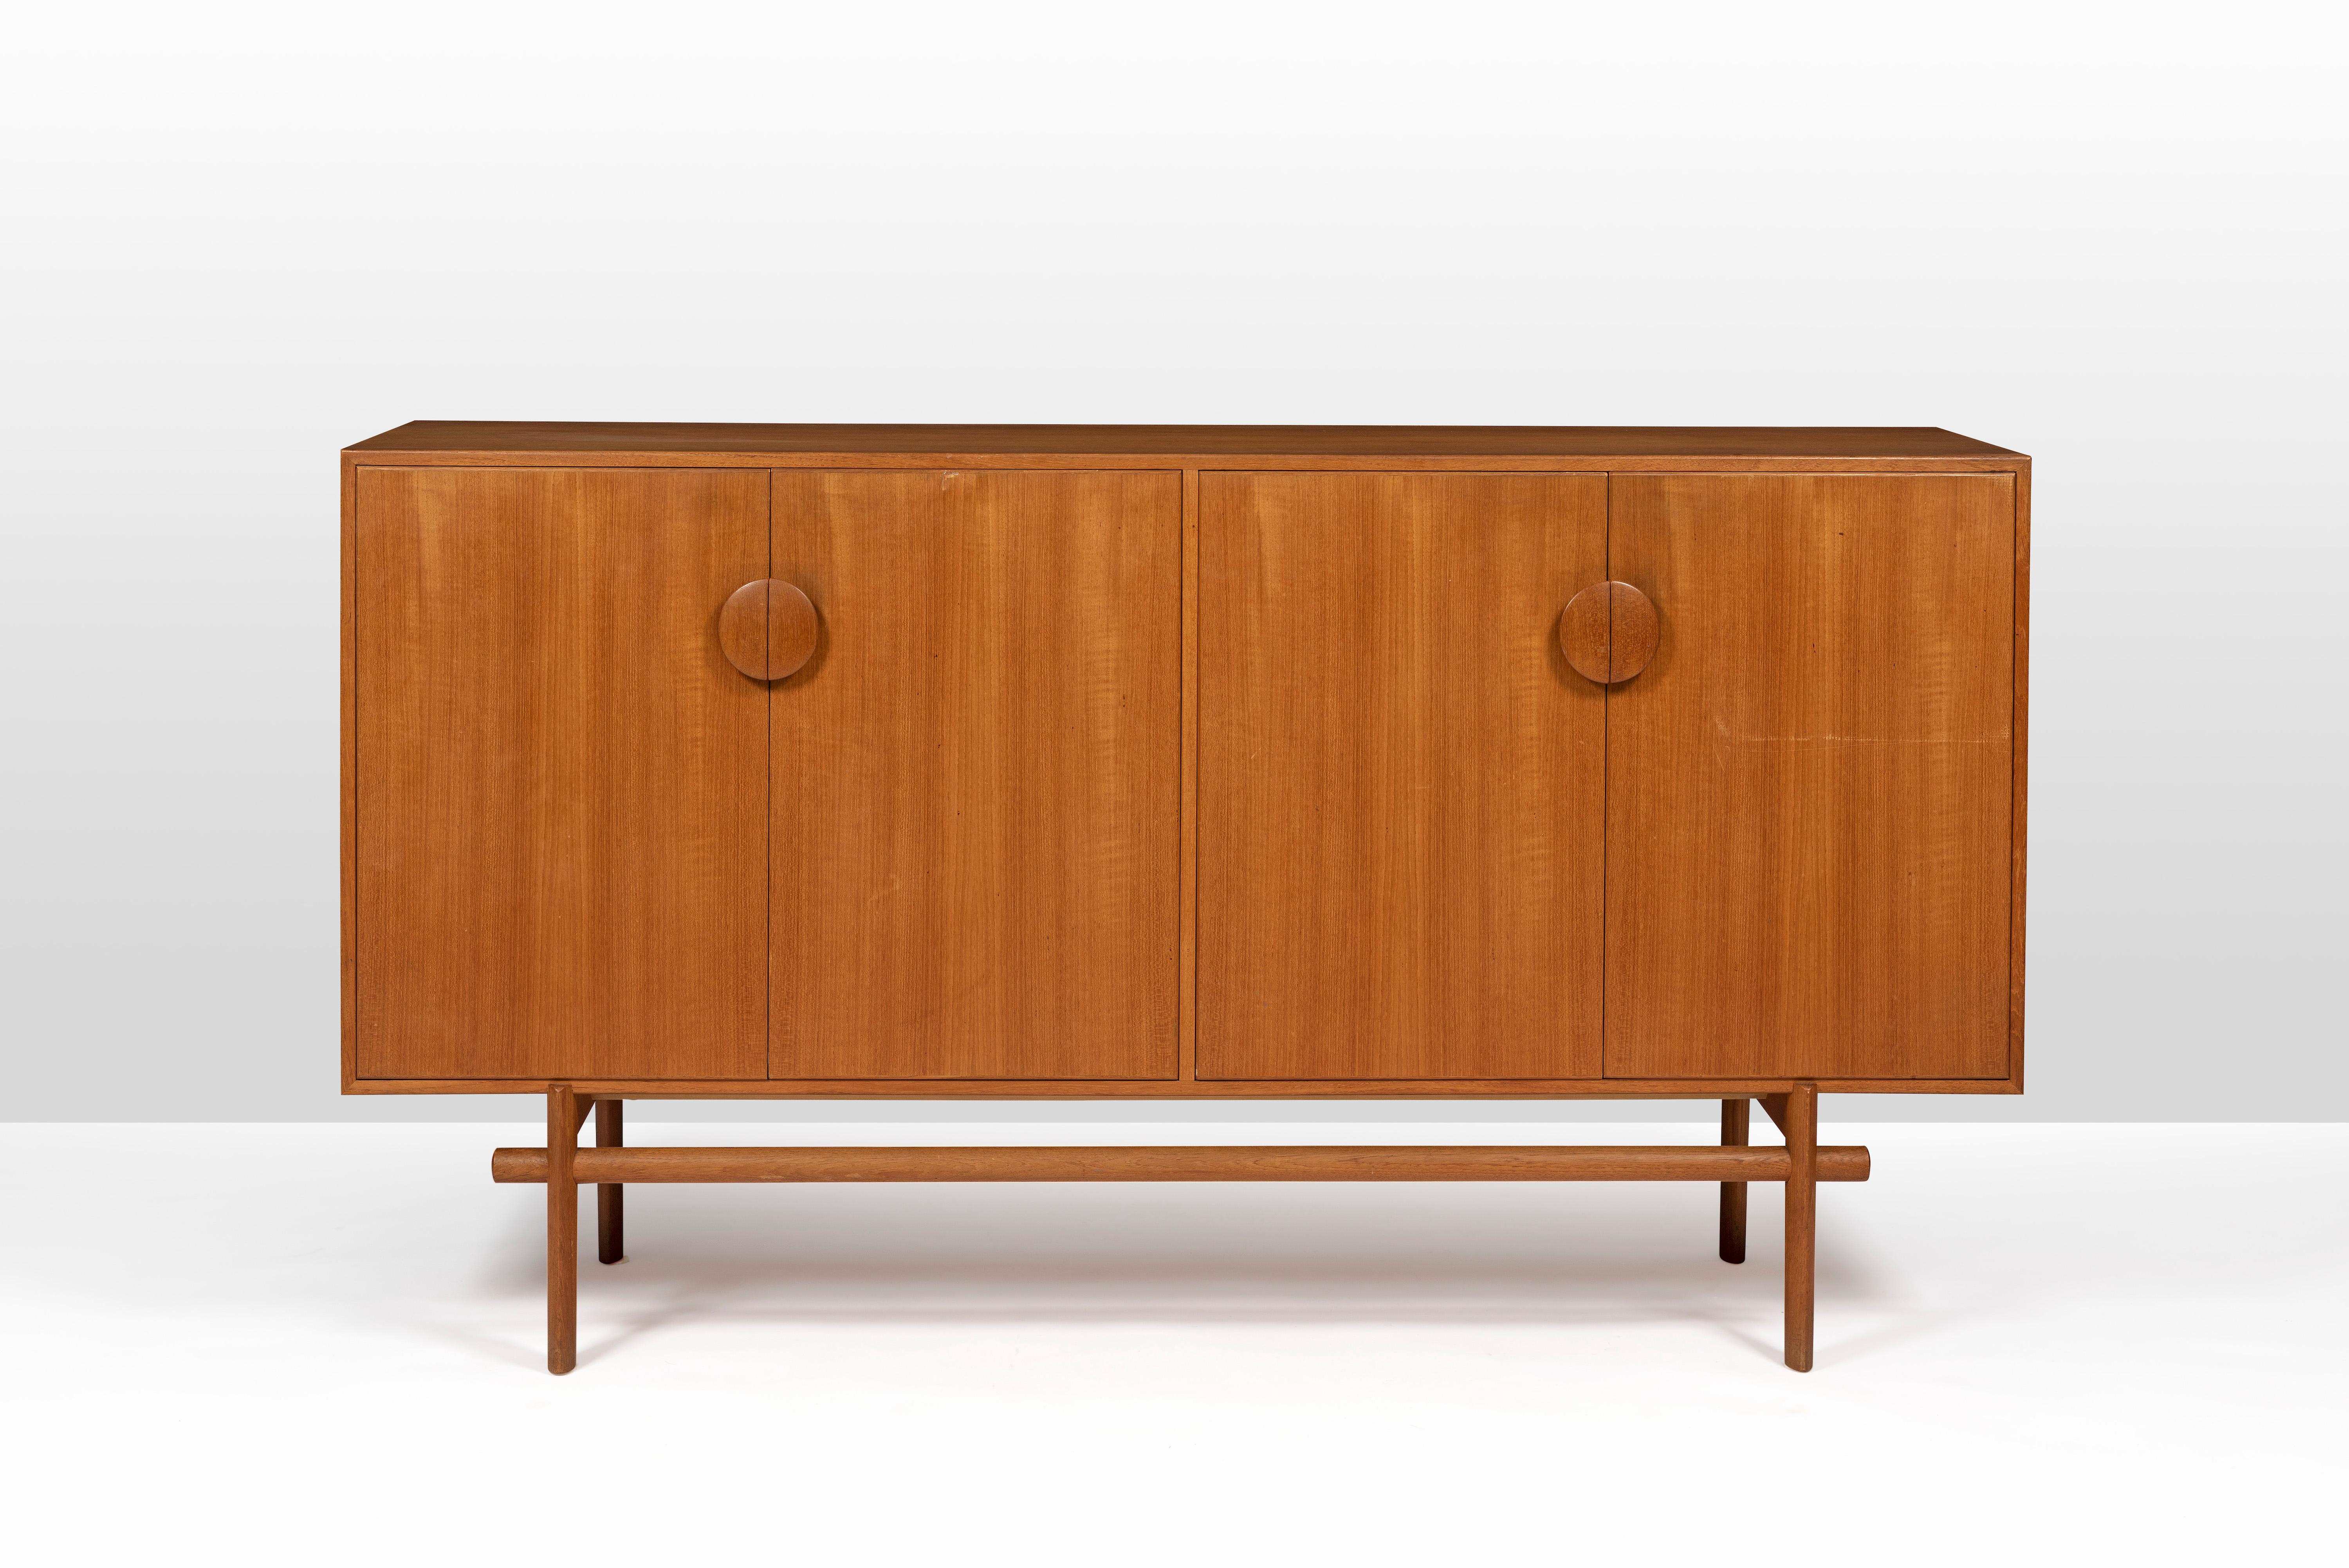 Danish designer couple Tove and Edvard Kindt-Larsen designed this cabinet with drawers in 1961. Both Tove (1906-1994) and Edvardt (1901-1982) Kindt-Larsen were trained as architects. During their marriage and partnership as architects and furniture